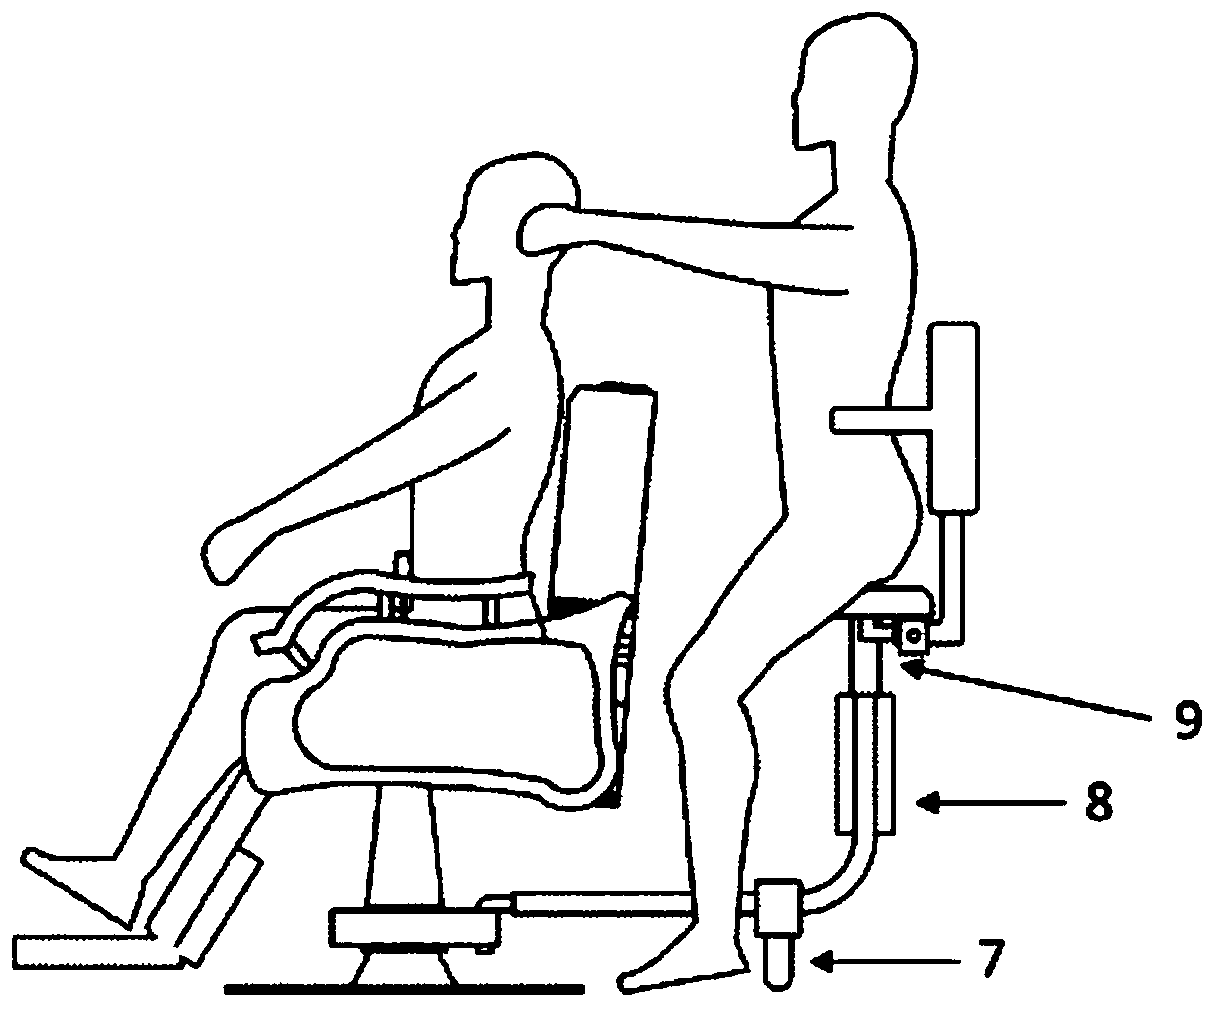 New ergonomic workstation with assisted movement for hairdressers